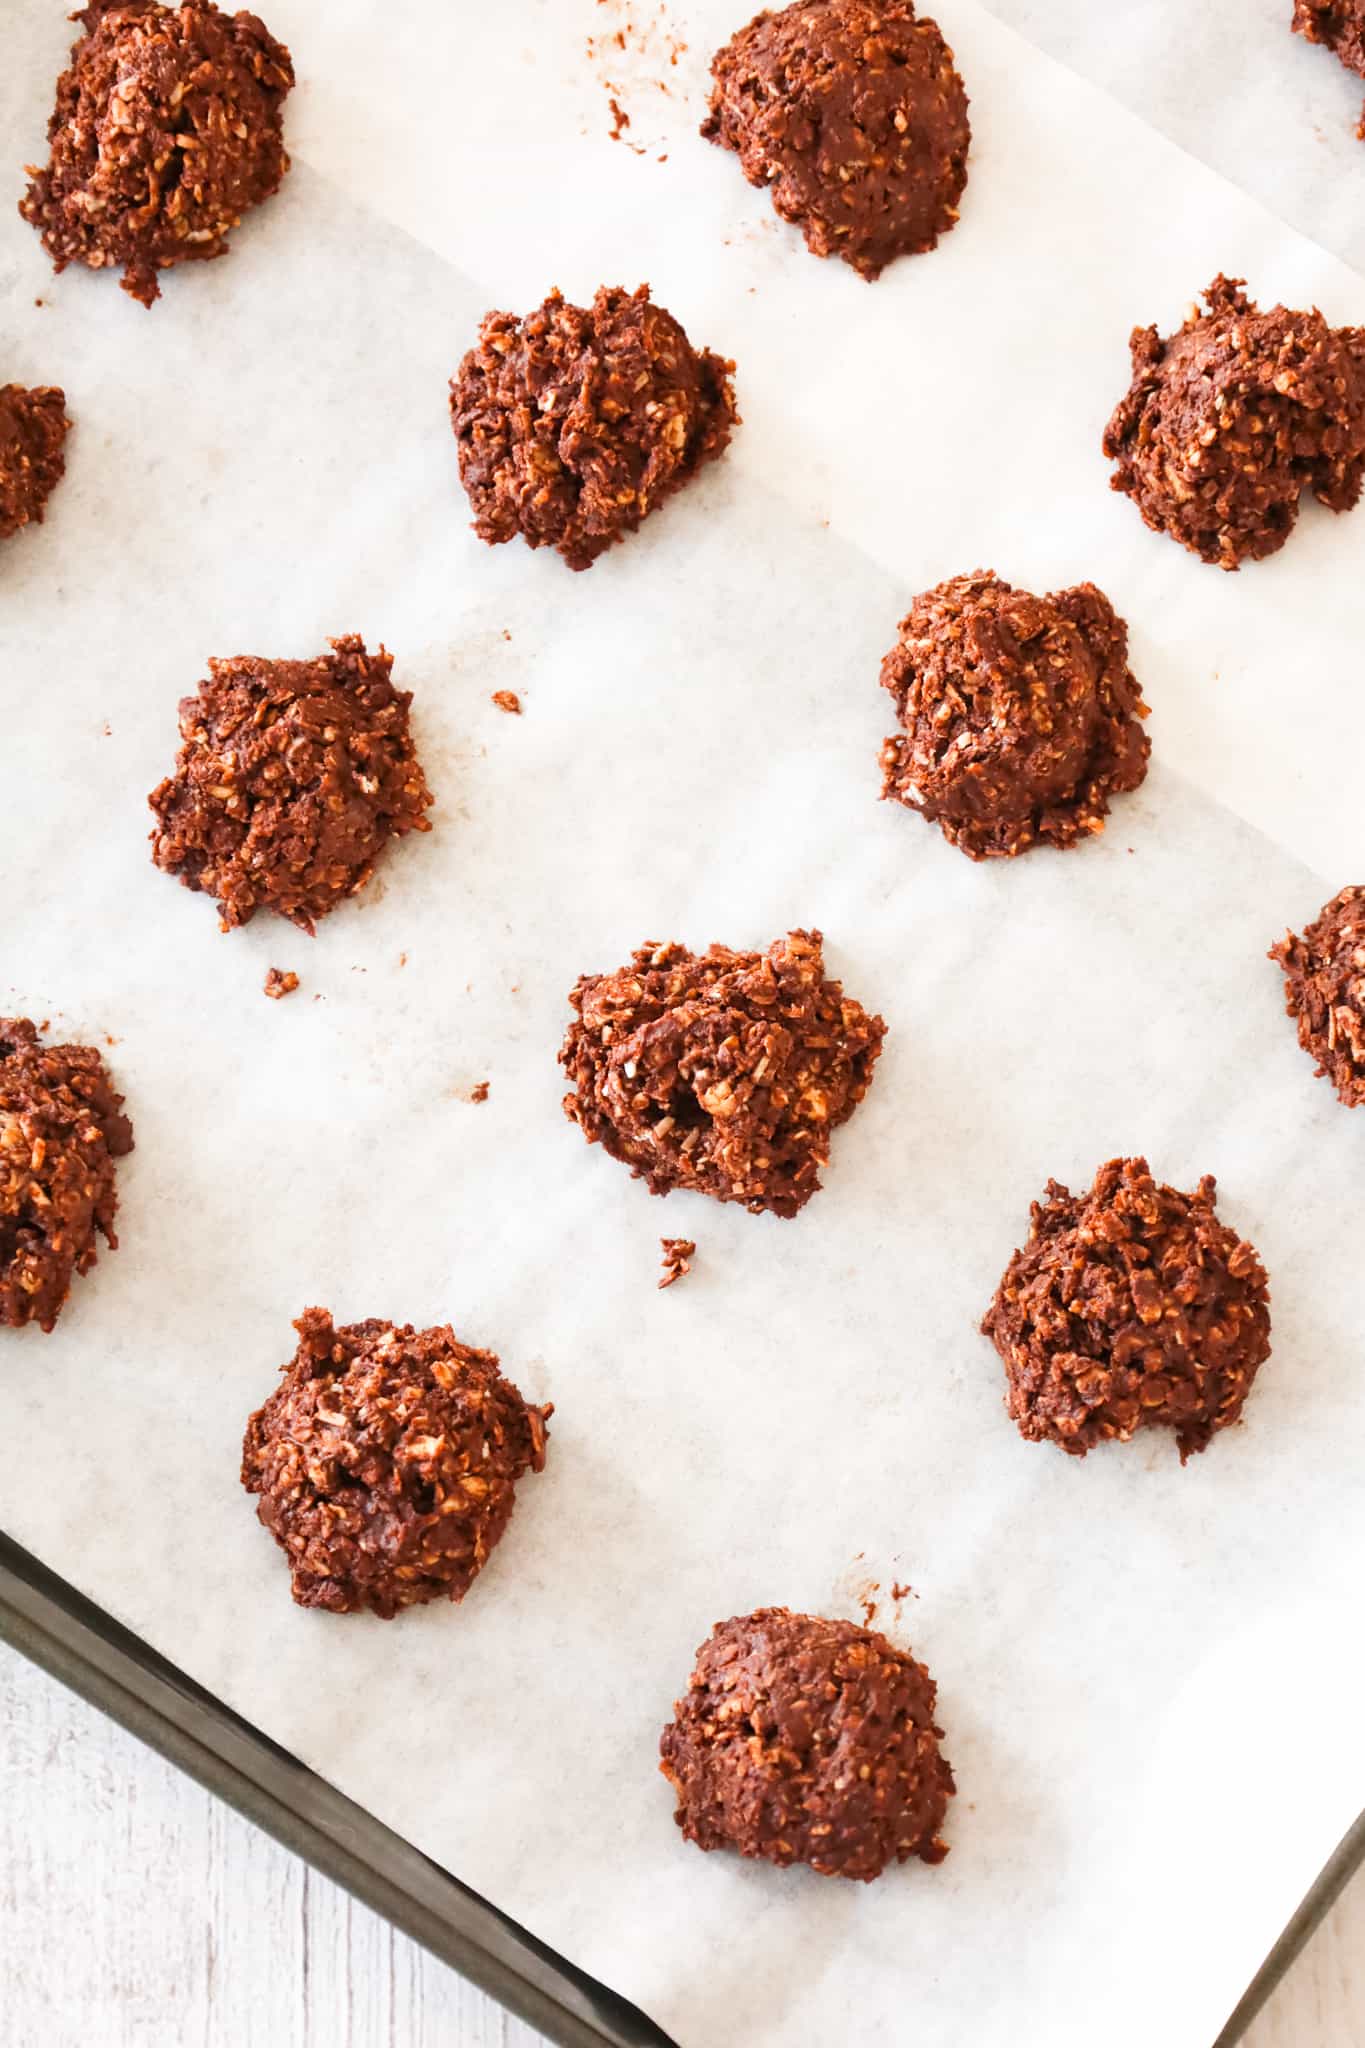 Haystack Cookies are easy no bake cookies loaded with quick oats, shredded coconut, melted chocolate and peanut butter.